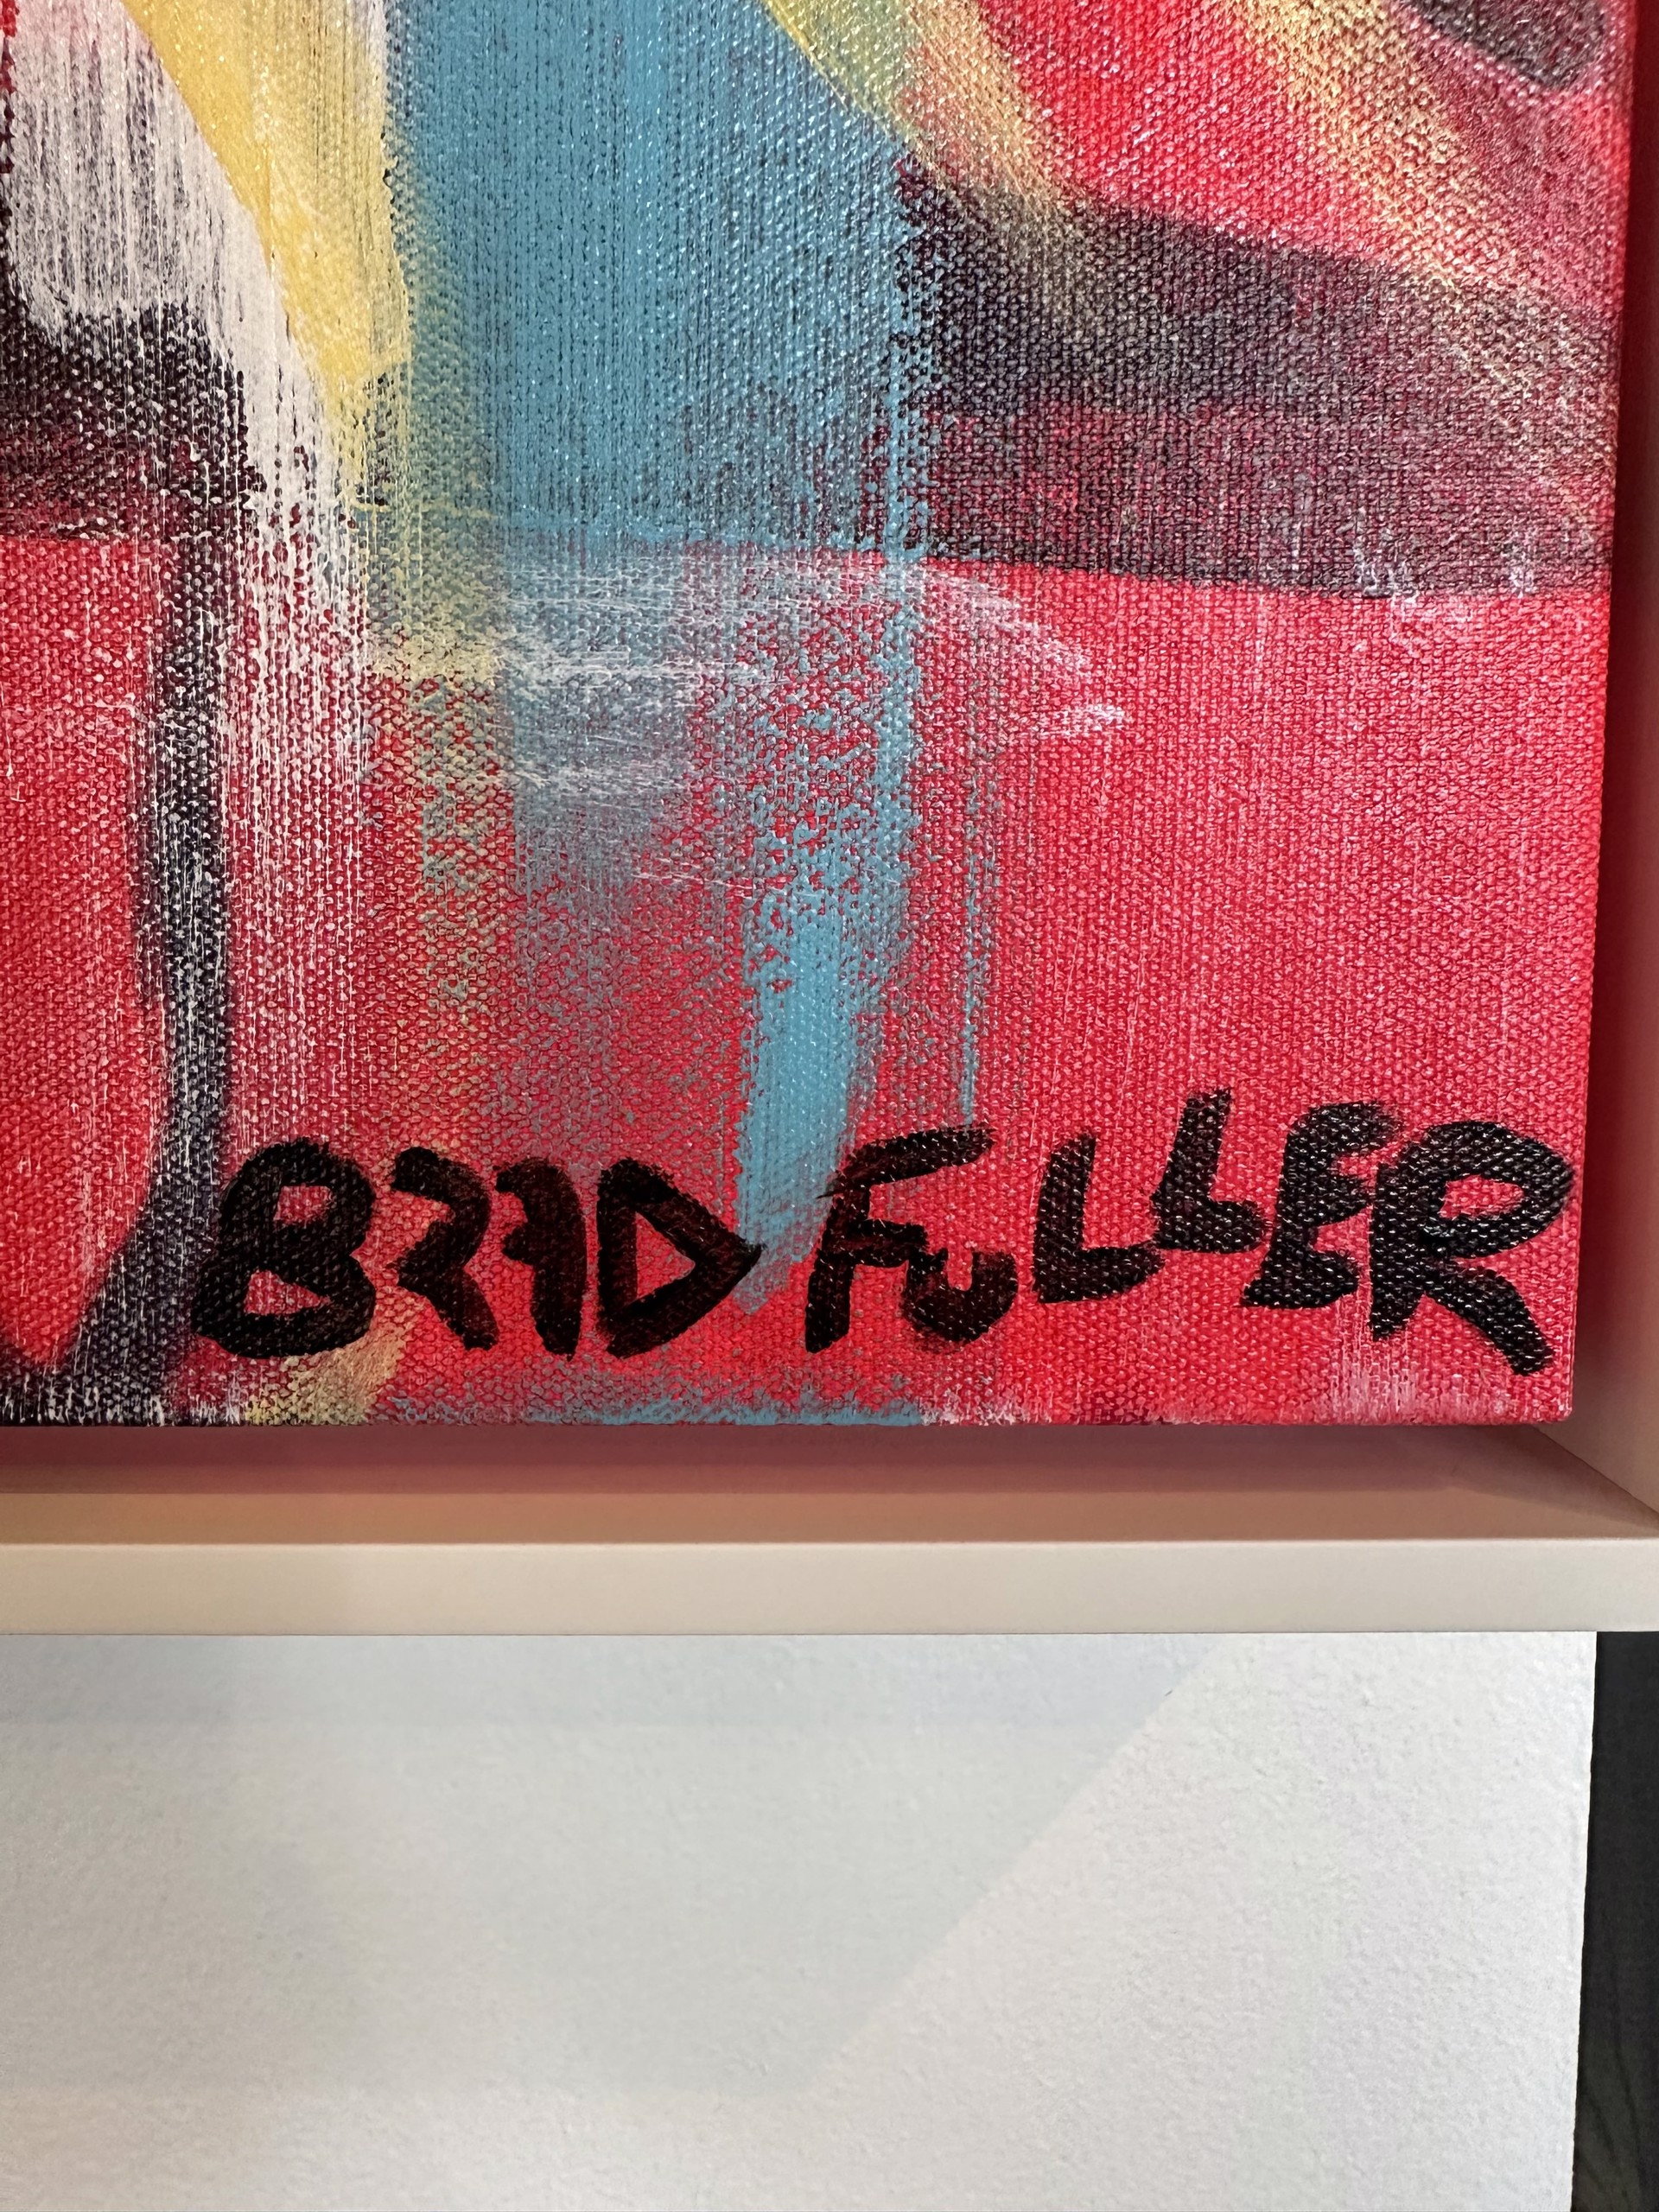 Her Reflection by Brad Fuller